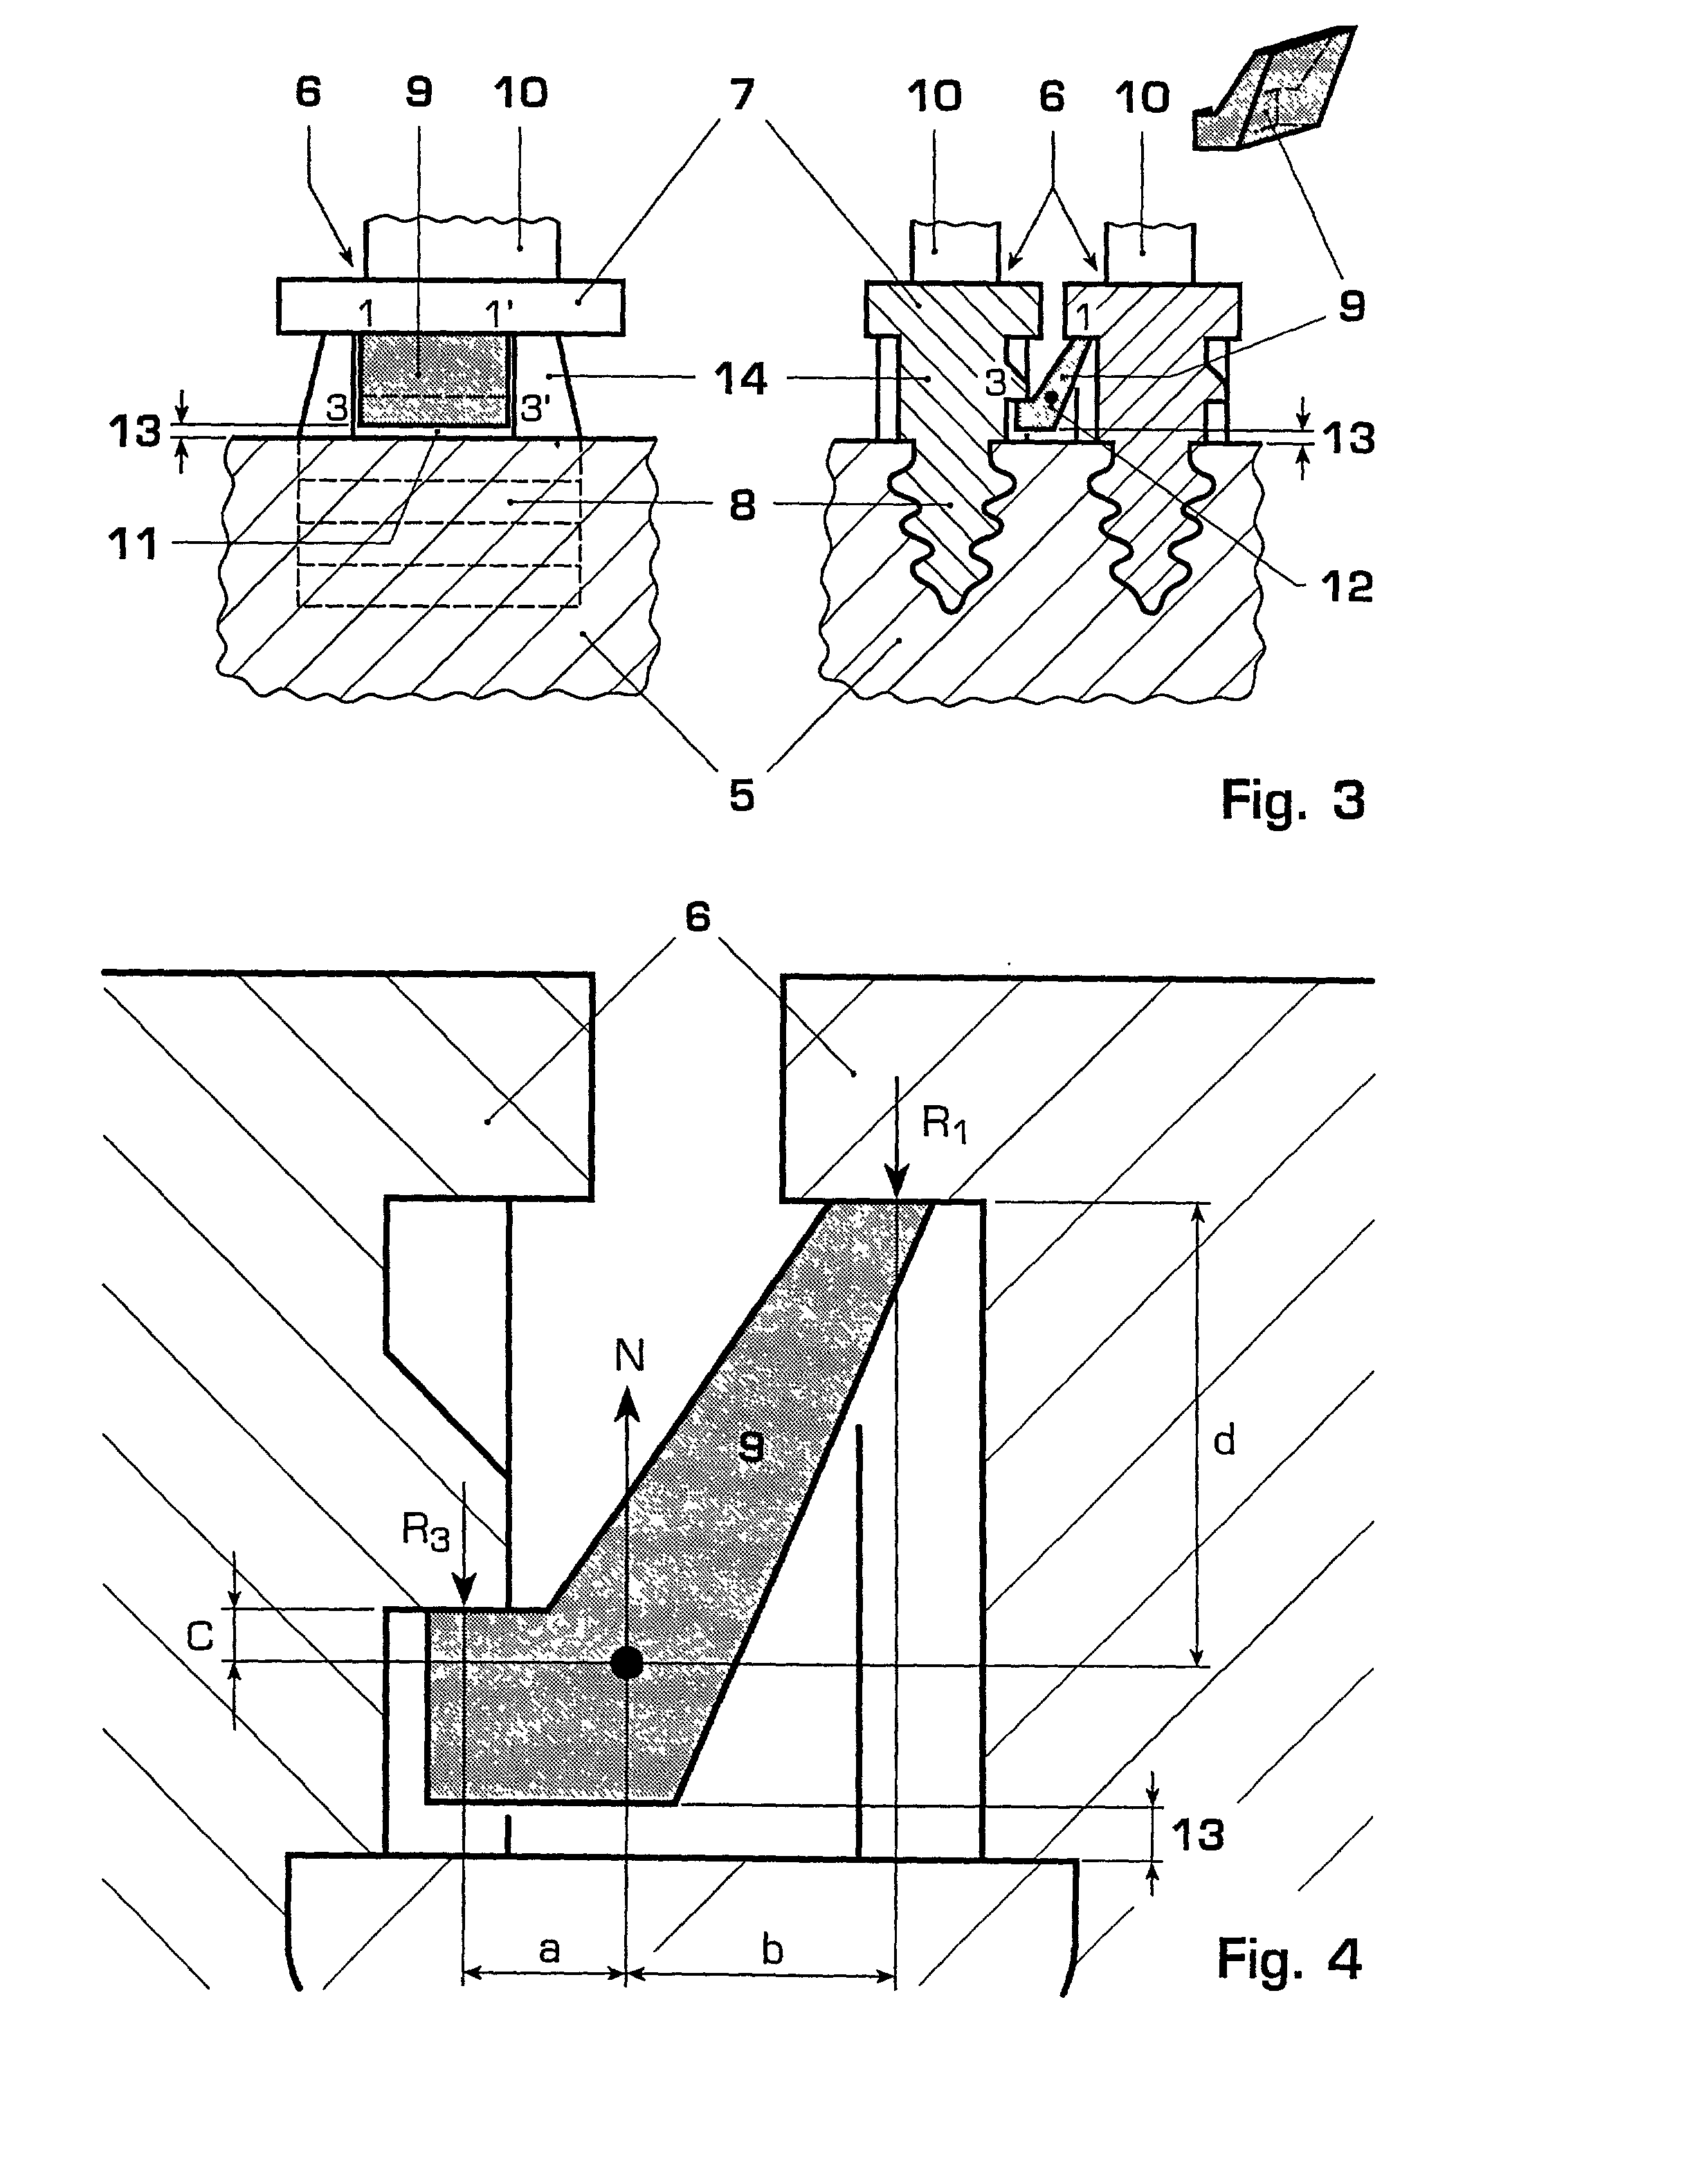 Blade assembly with damping elements